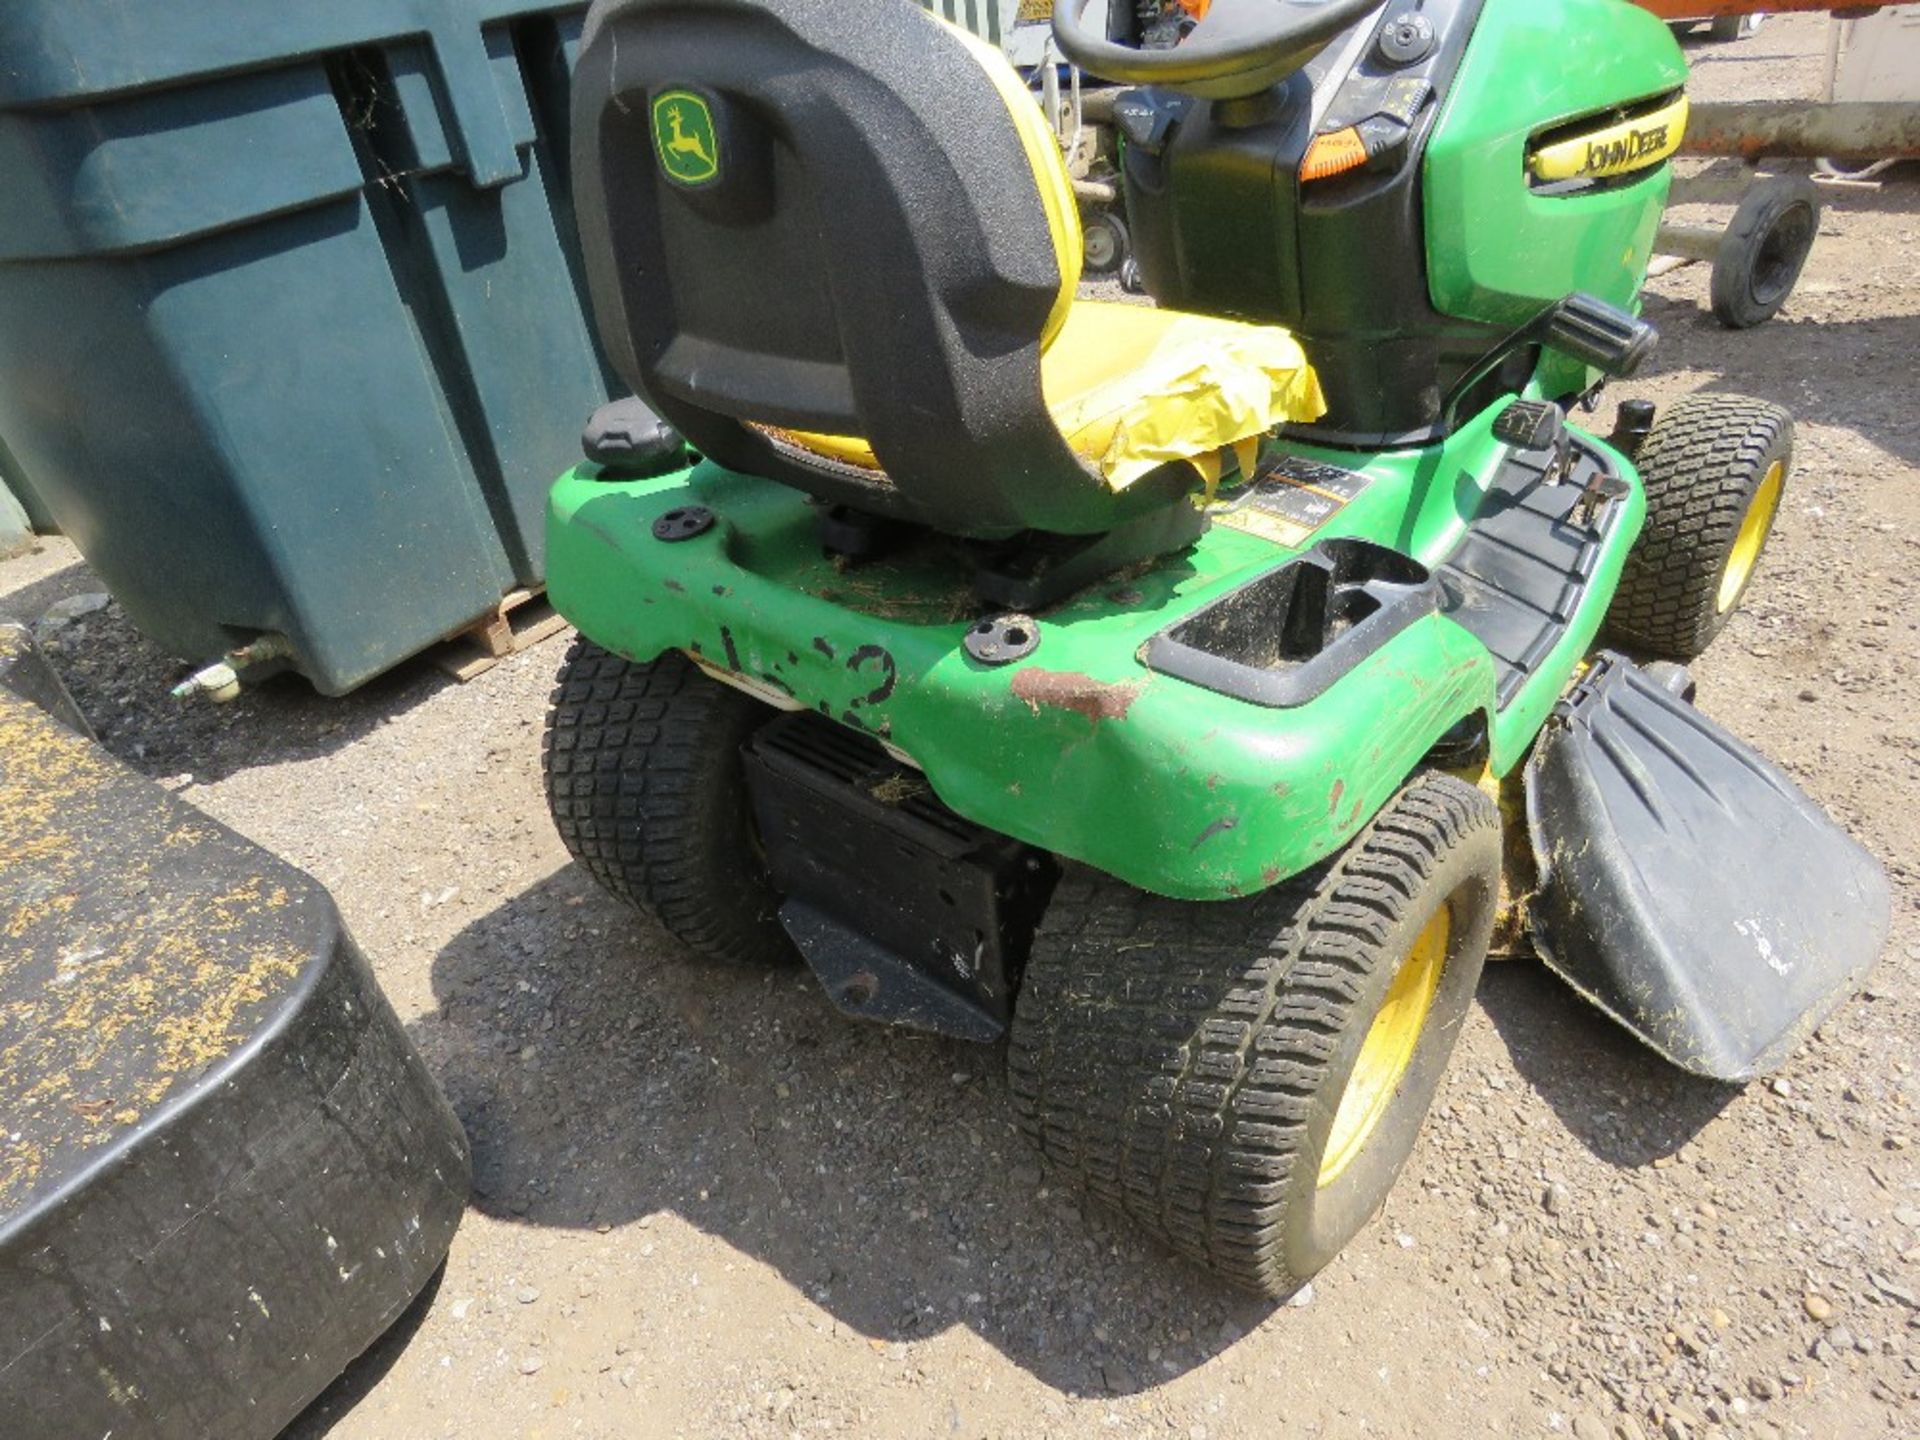 JOHN DEERE X320 PETROL RIDE ON MOWER, 756 REC HOURS. RUNS AND DRIVES BUT MOWERS NOT ENGAGING...NO BE - Image 3 of 11